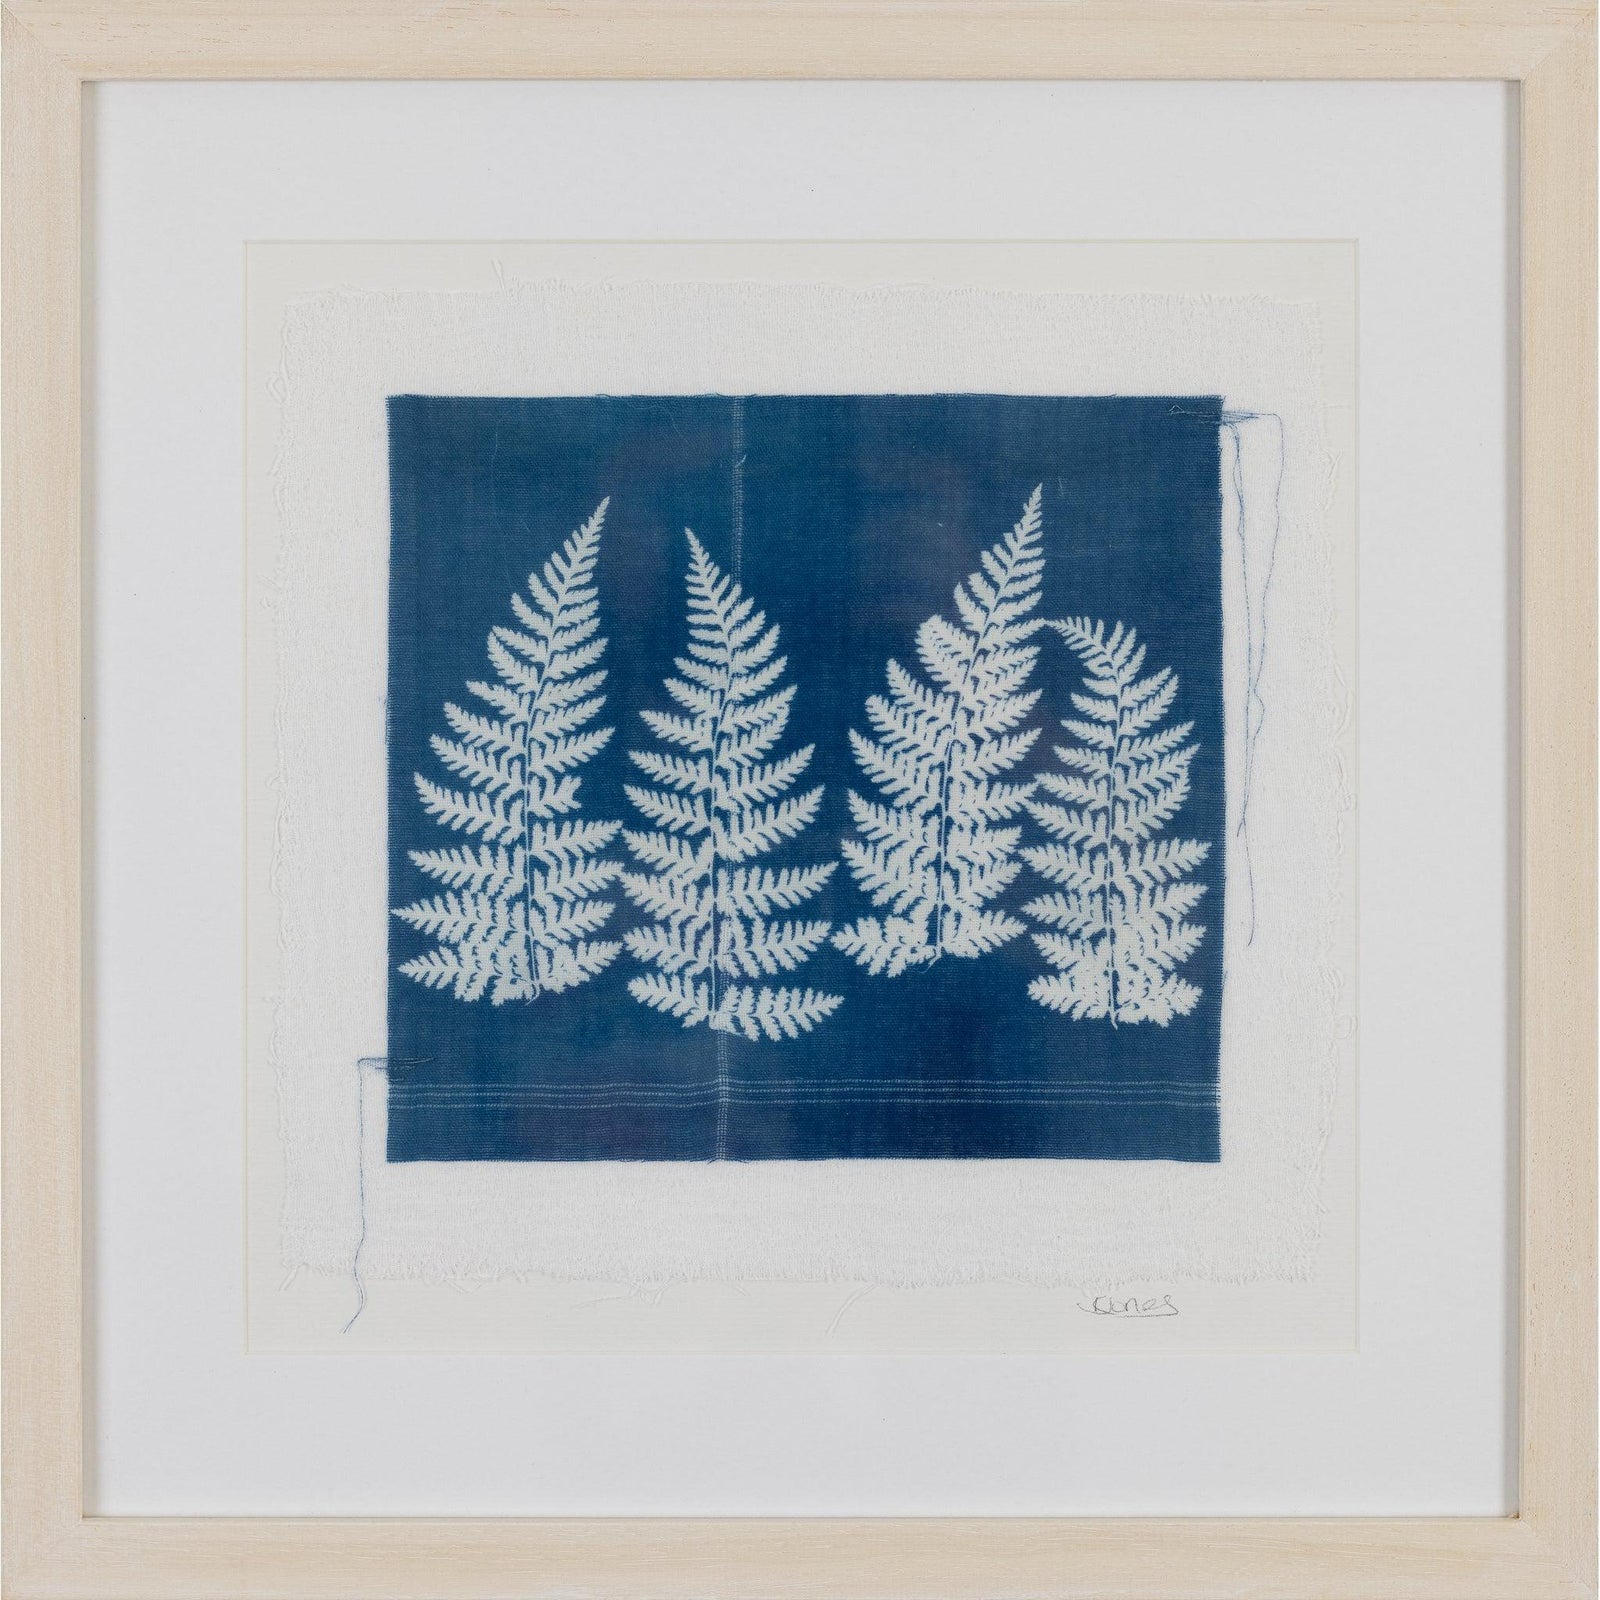 'Ferns' Cyanotype by Karen Jones, available at Padstow Gallery, Cornwall